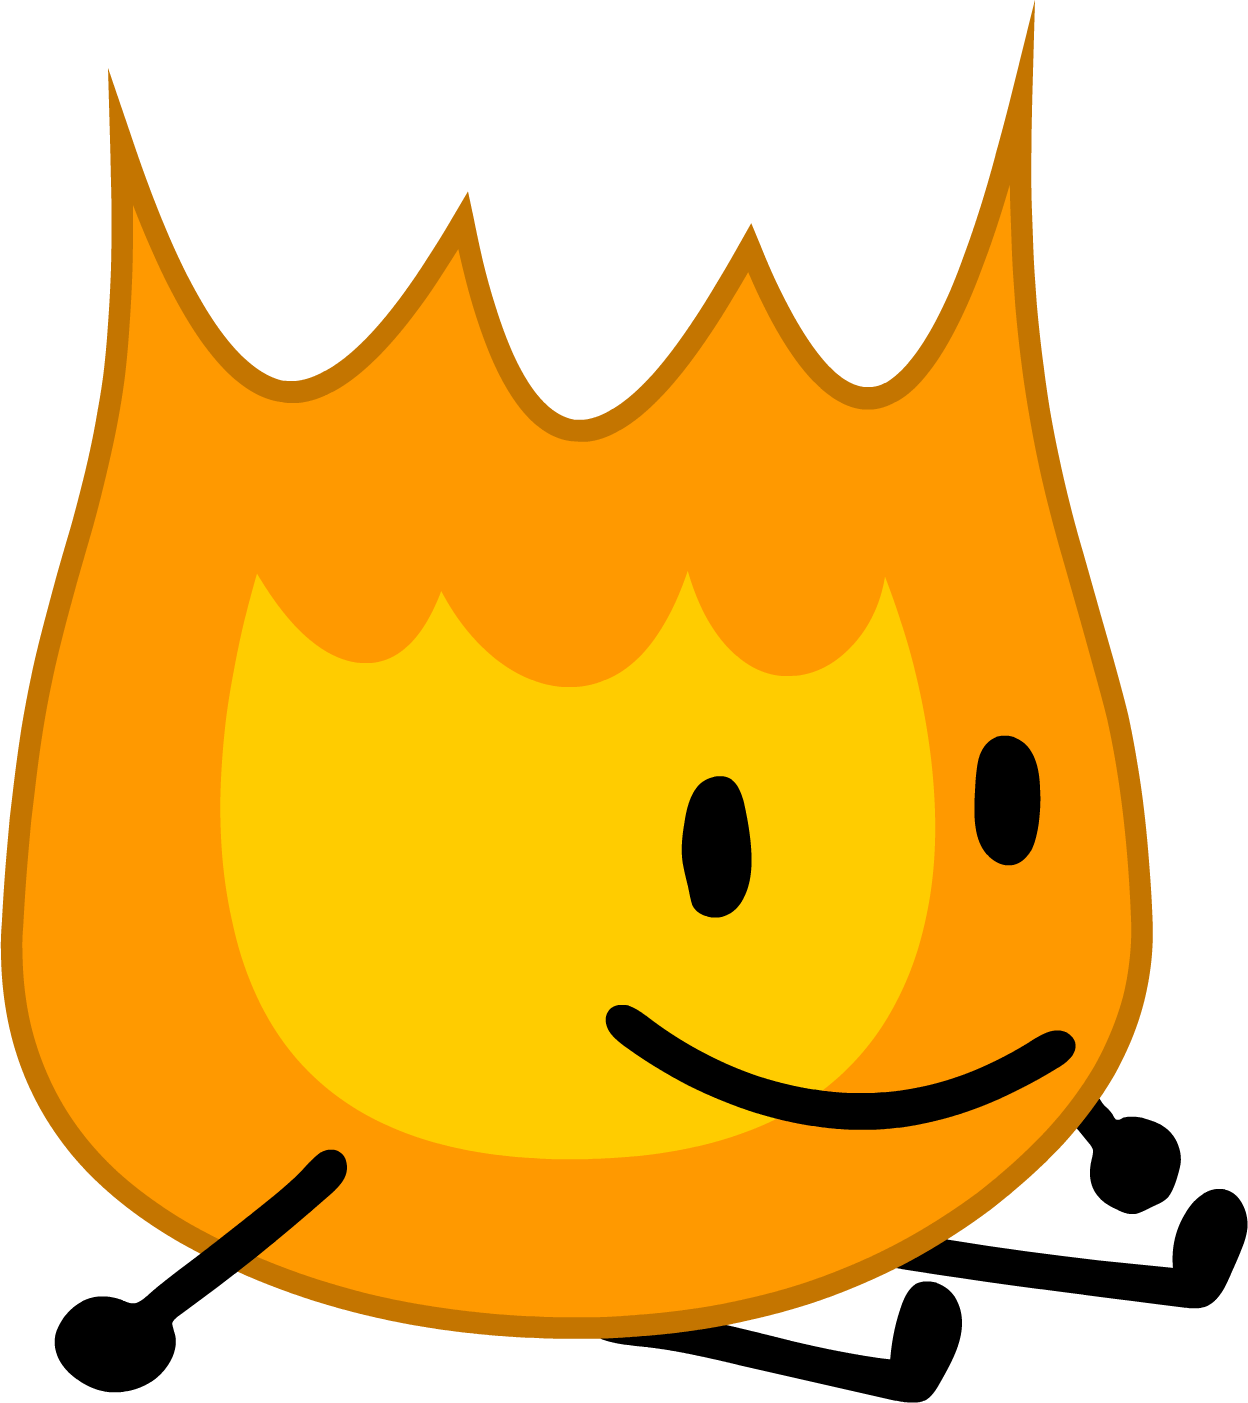 Animated Fire Character Smiling.png PNG